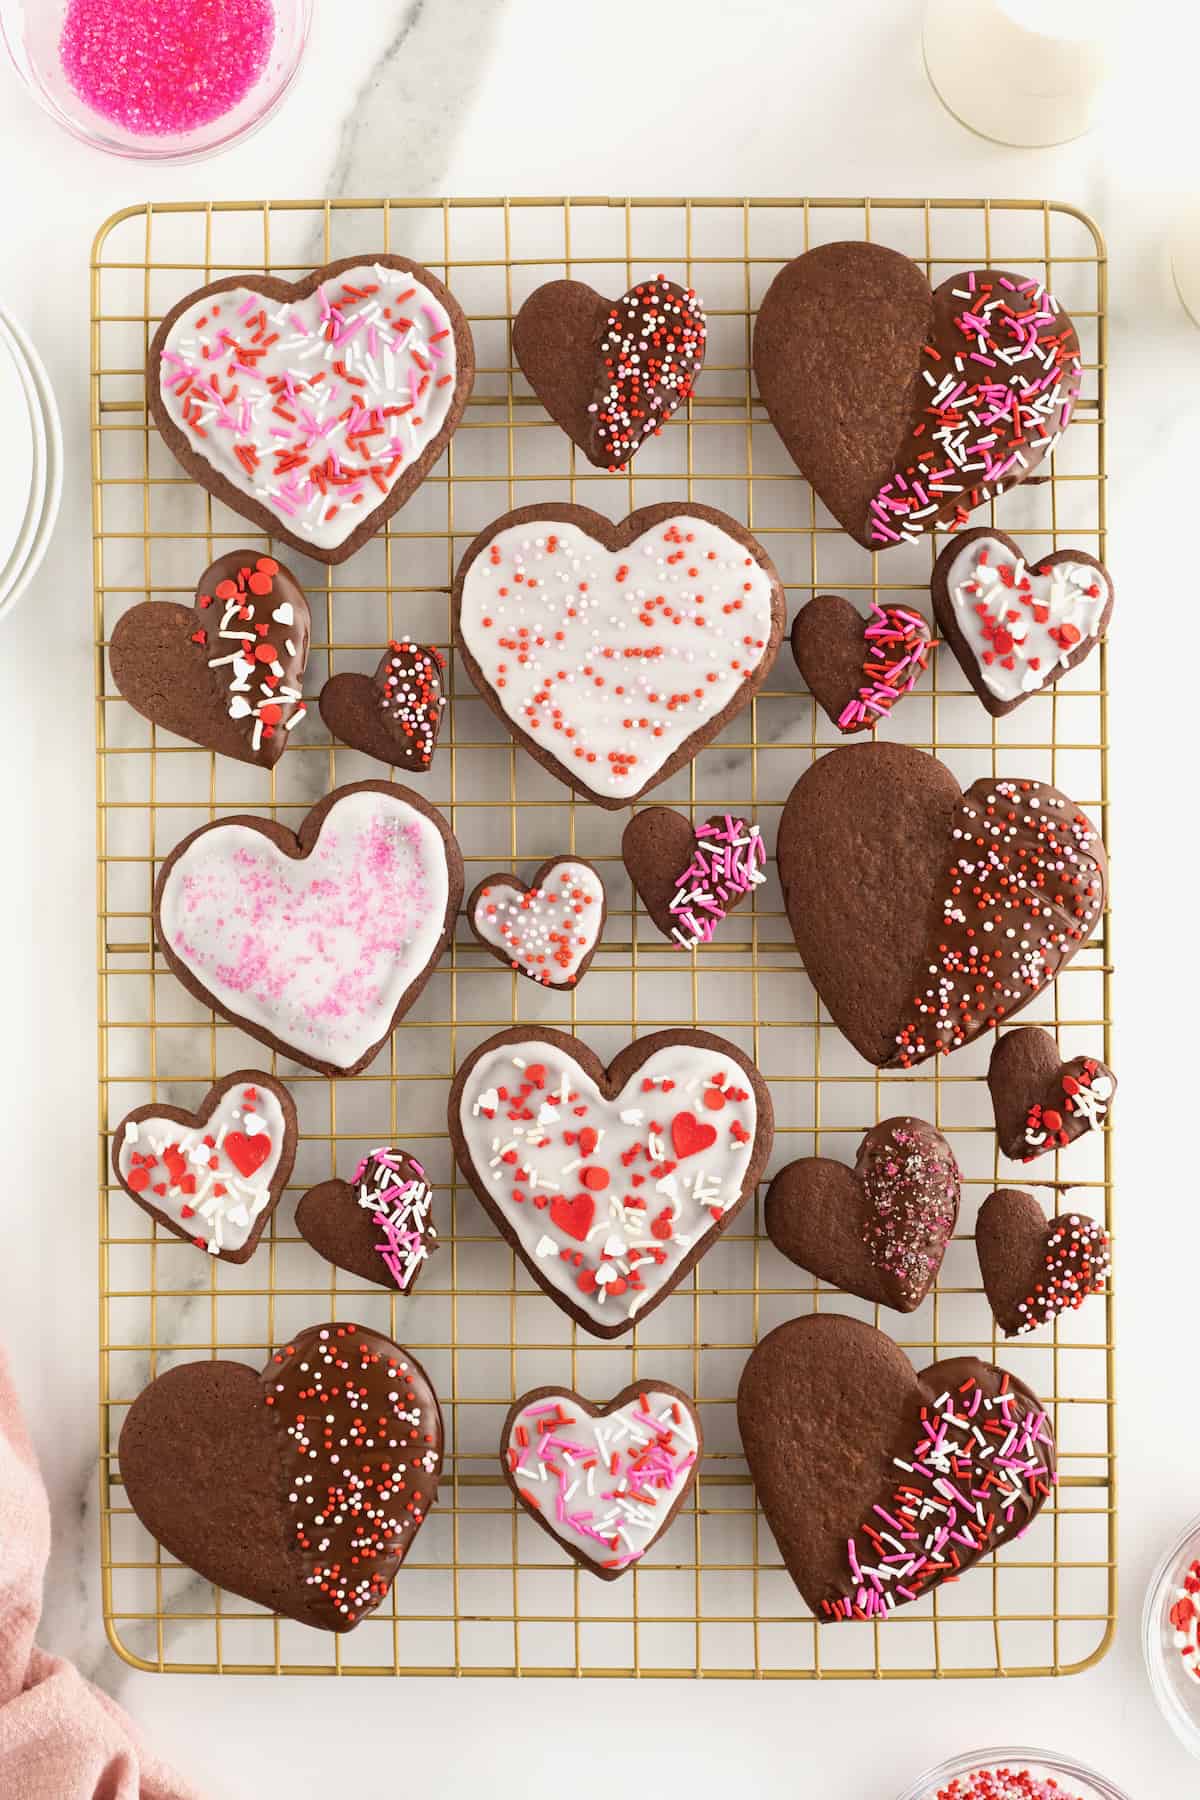 A gold toned metal cooling rack with chocolate heart shaped cookies of various sizes. Some of the cookies have white frosting and pink and red sprinkles. Some have chocolate frosting with sprinkles.